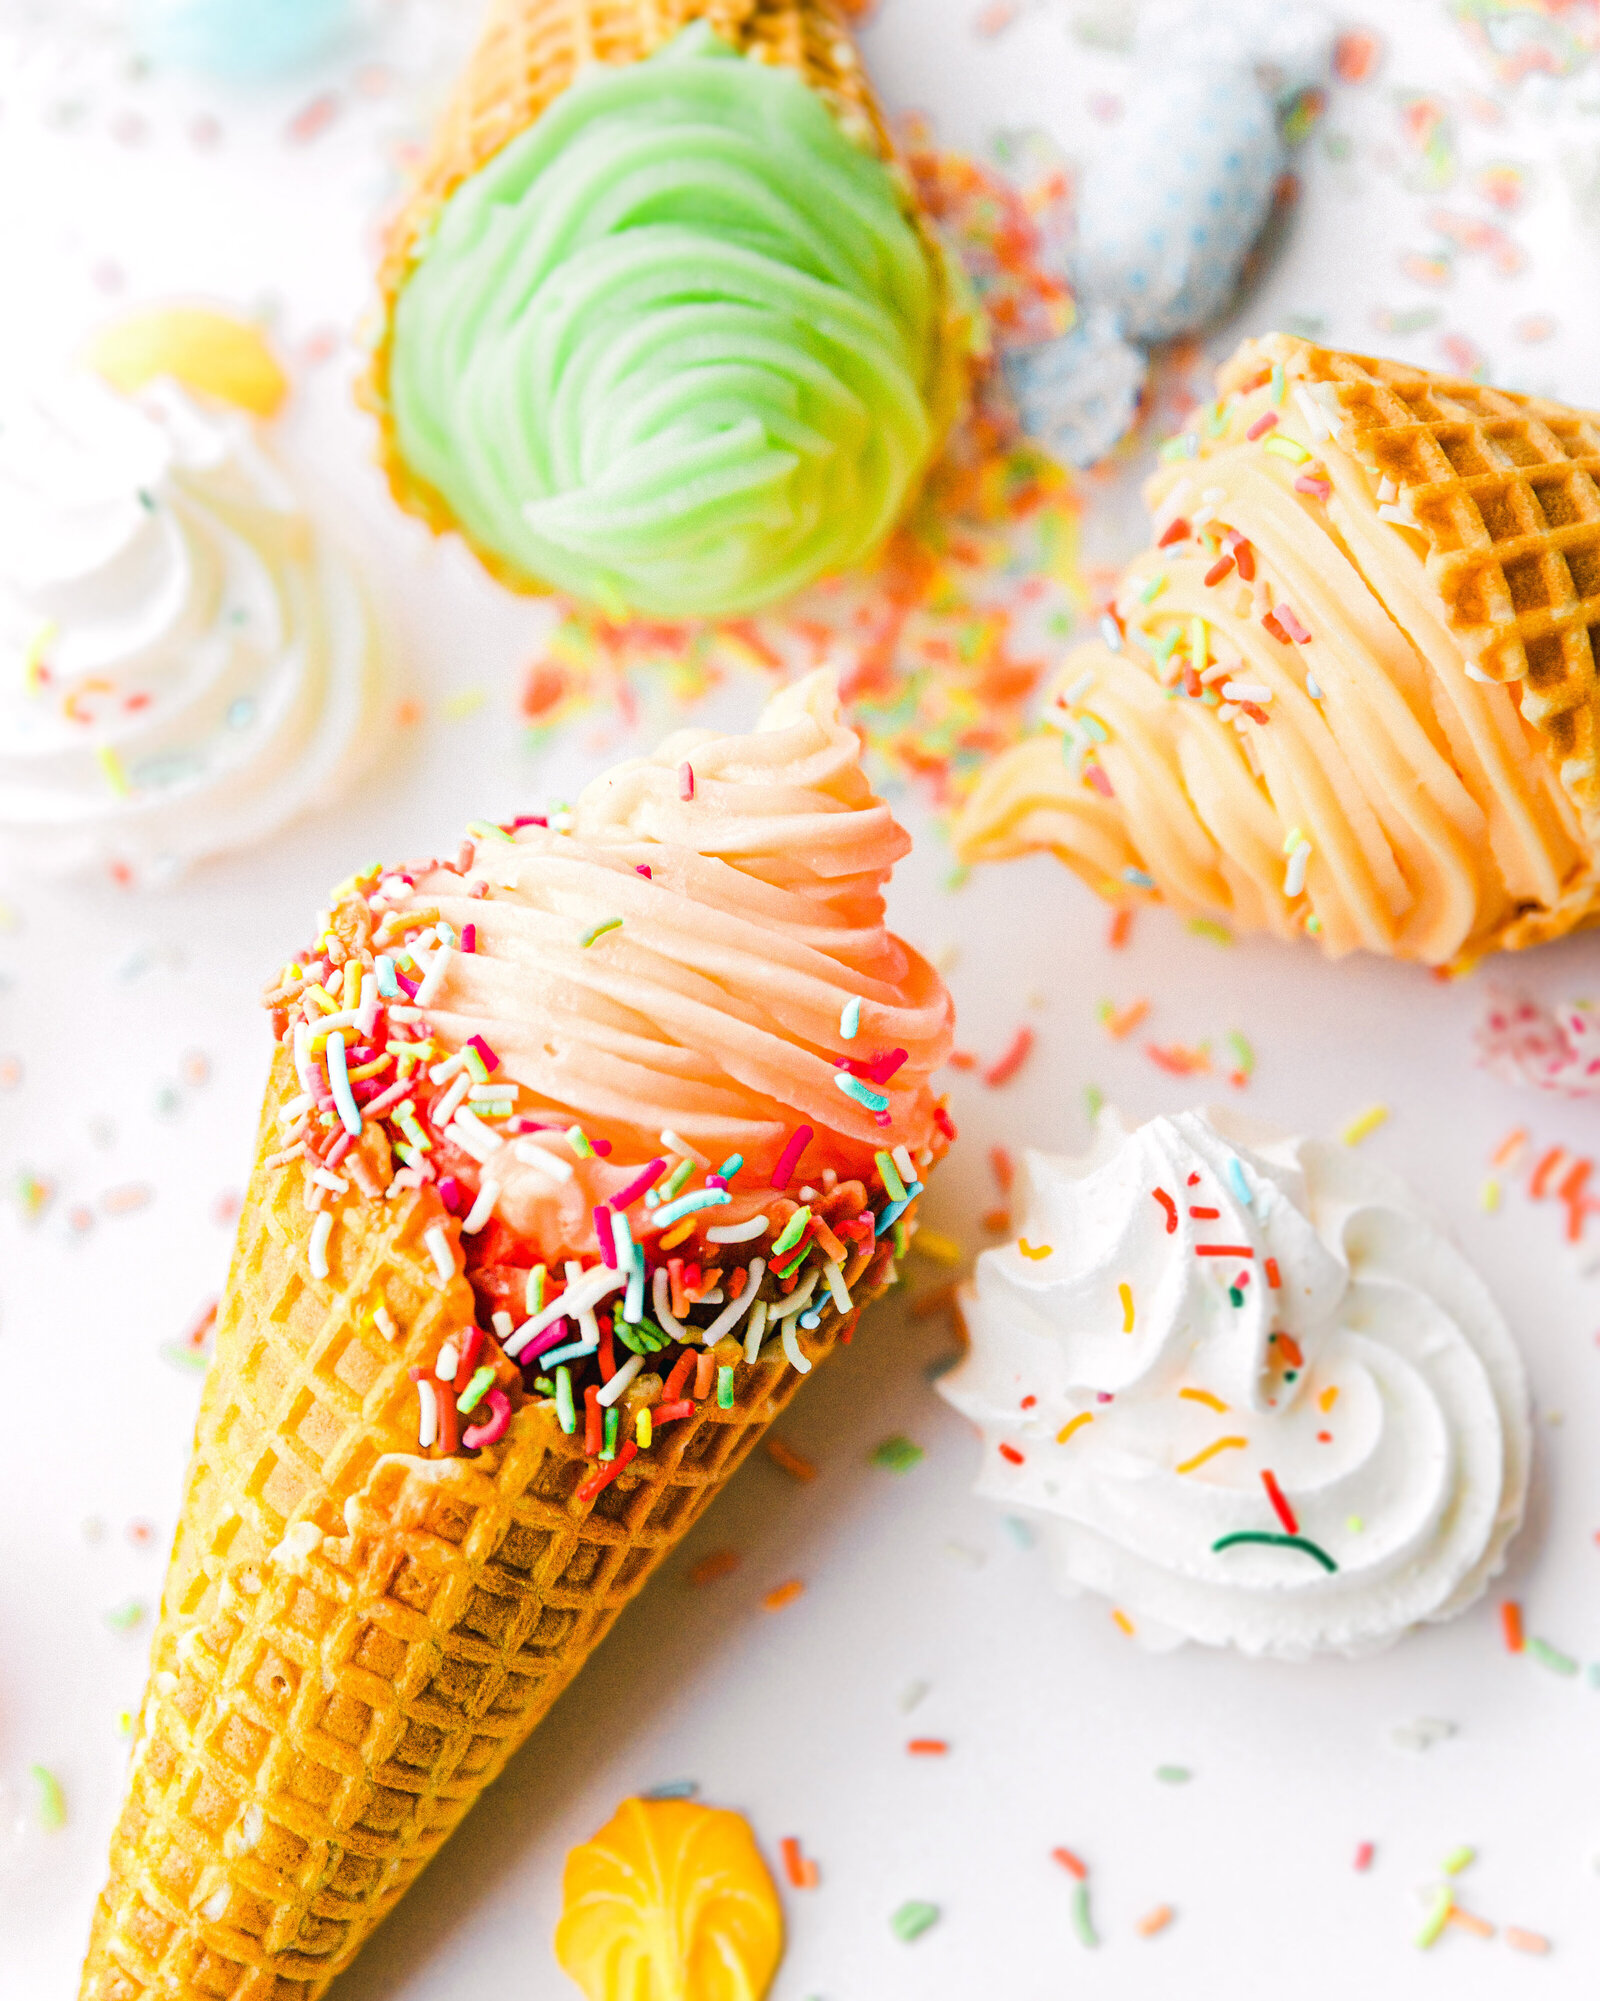 Fake Ice Cream for a Photoshoot Colorful Flat Lay